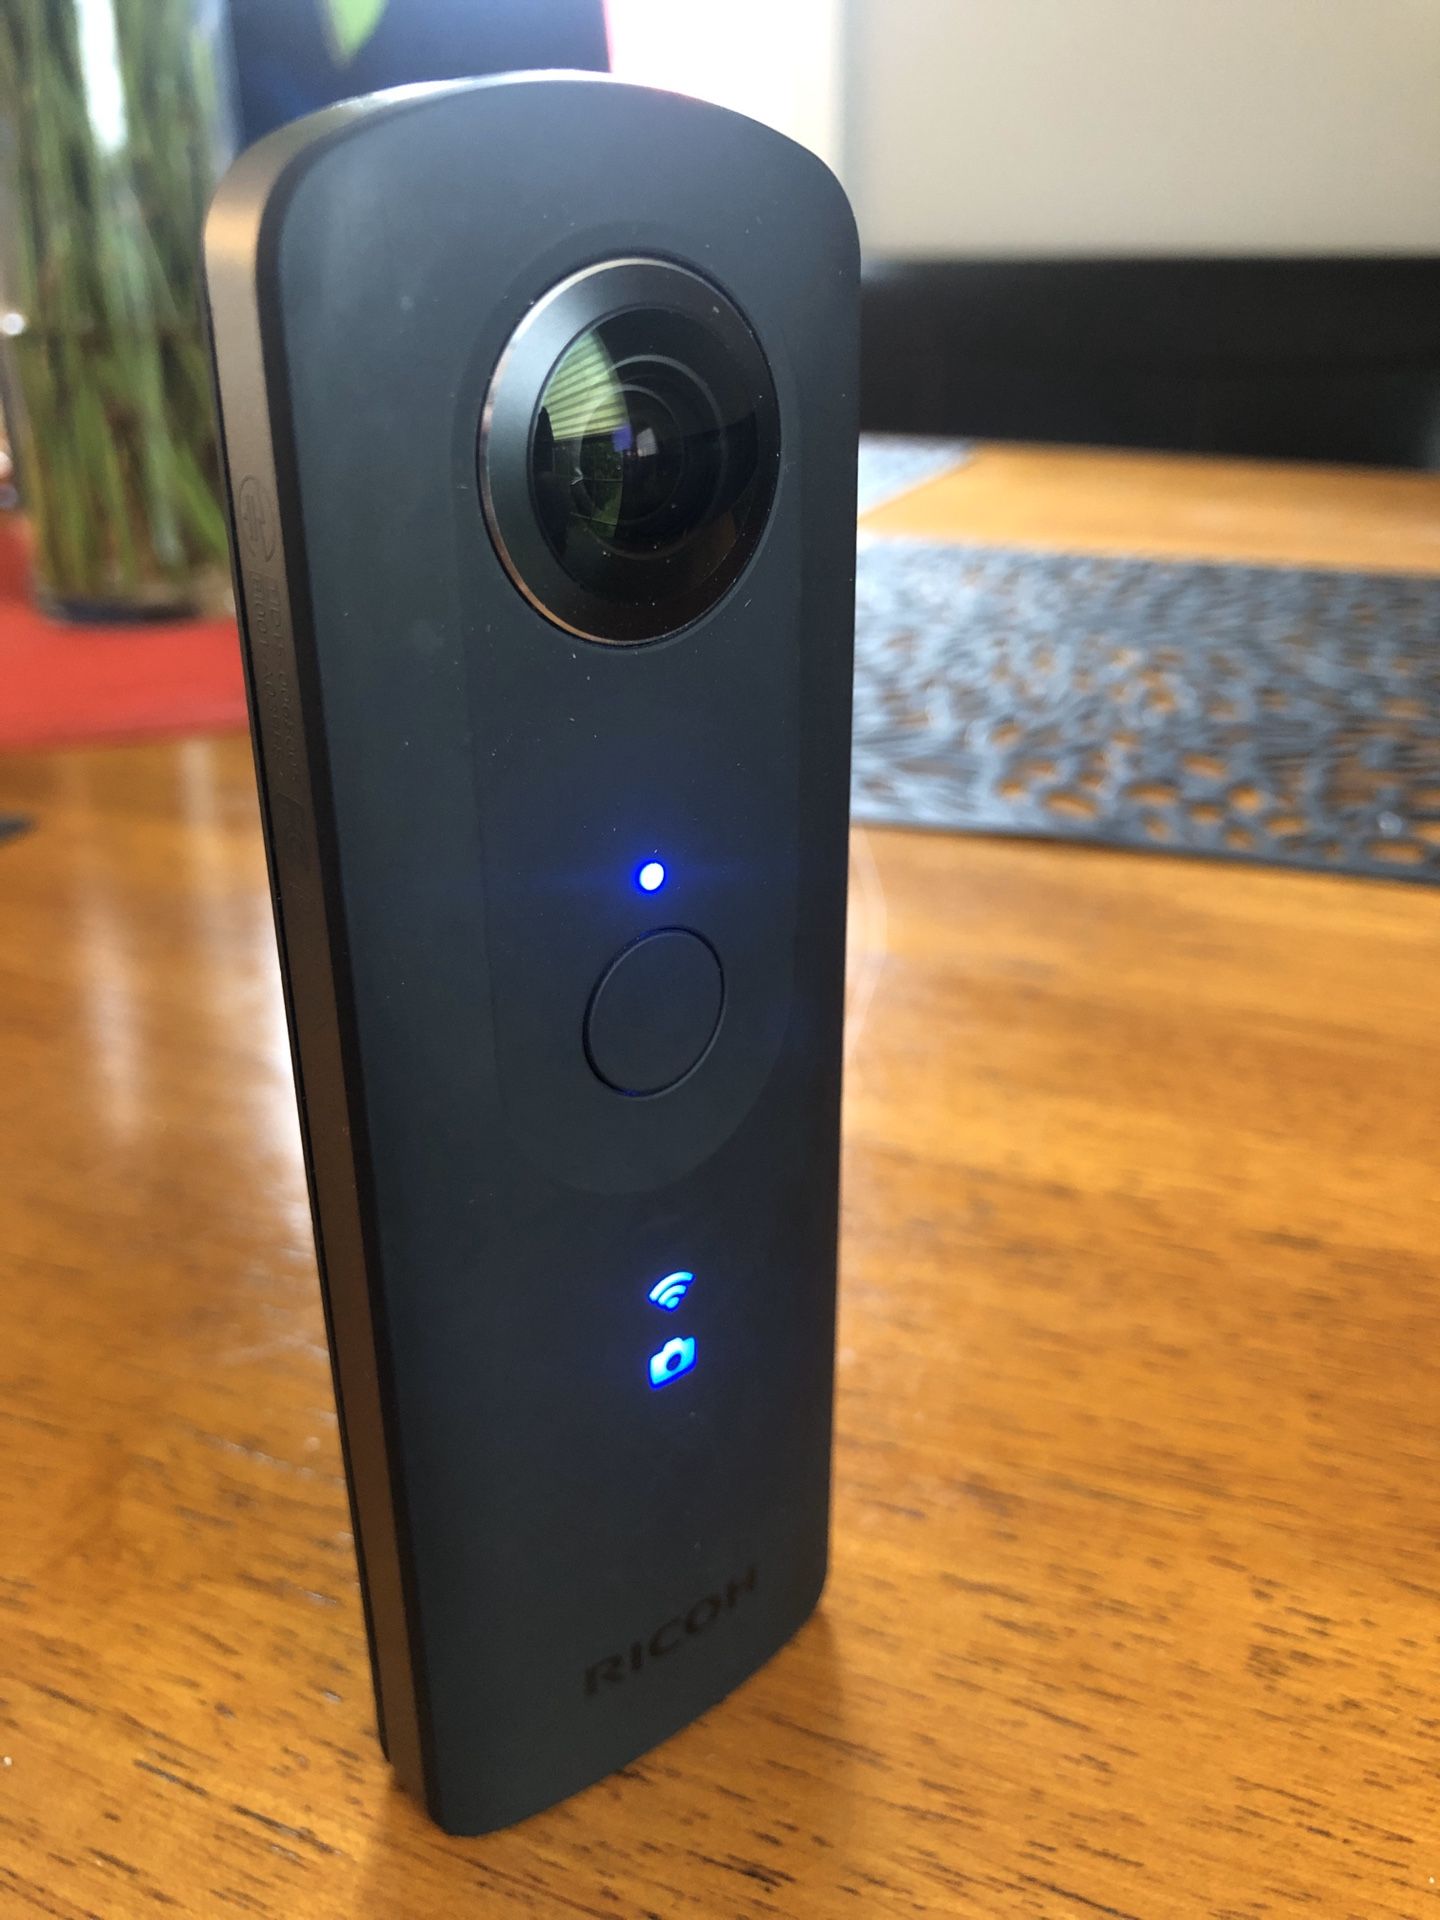 Ricoh Theta S 360 Camera with Underwater Dome